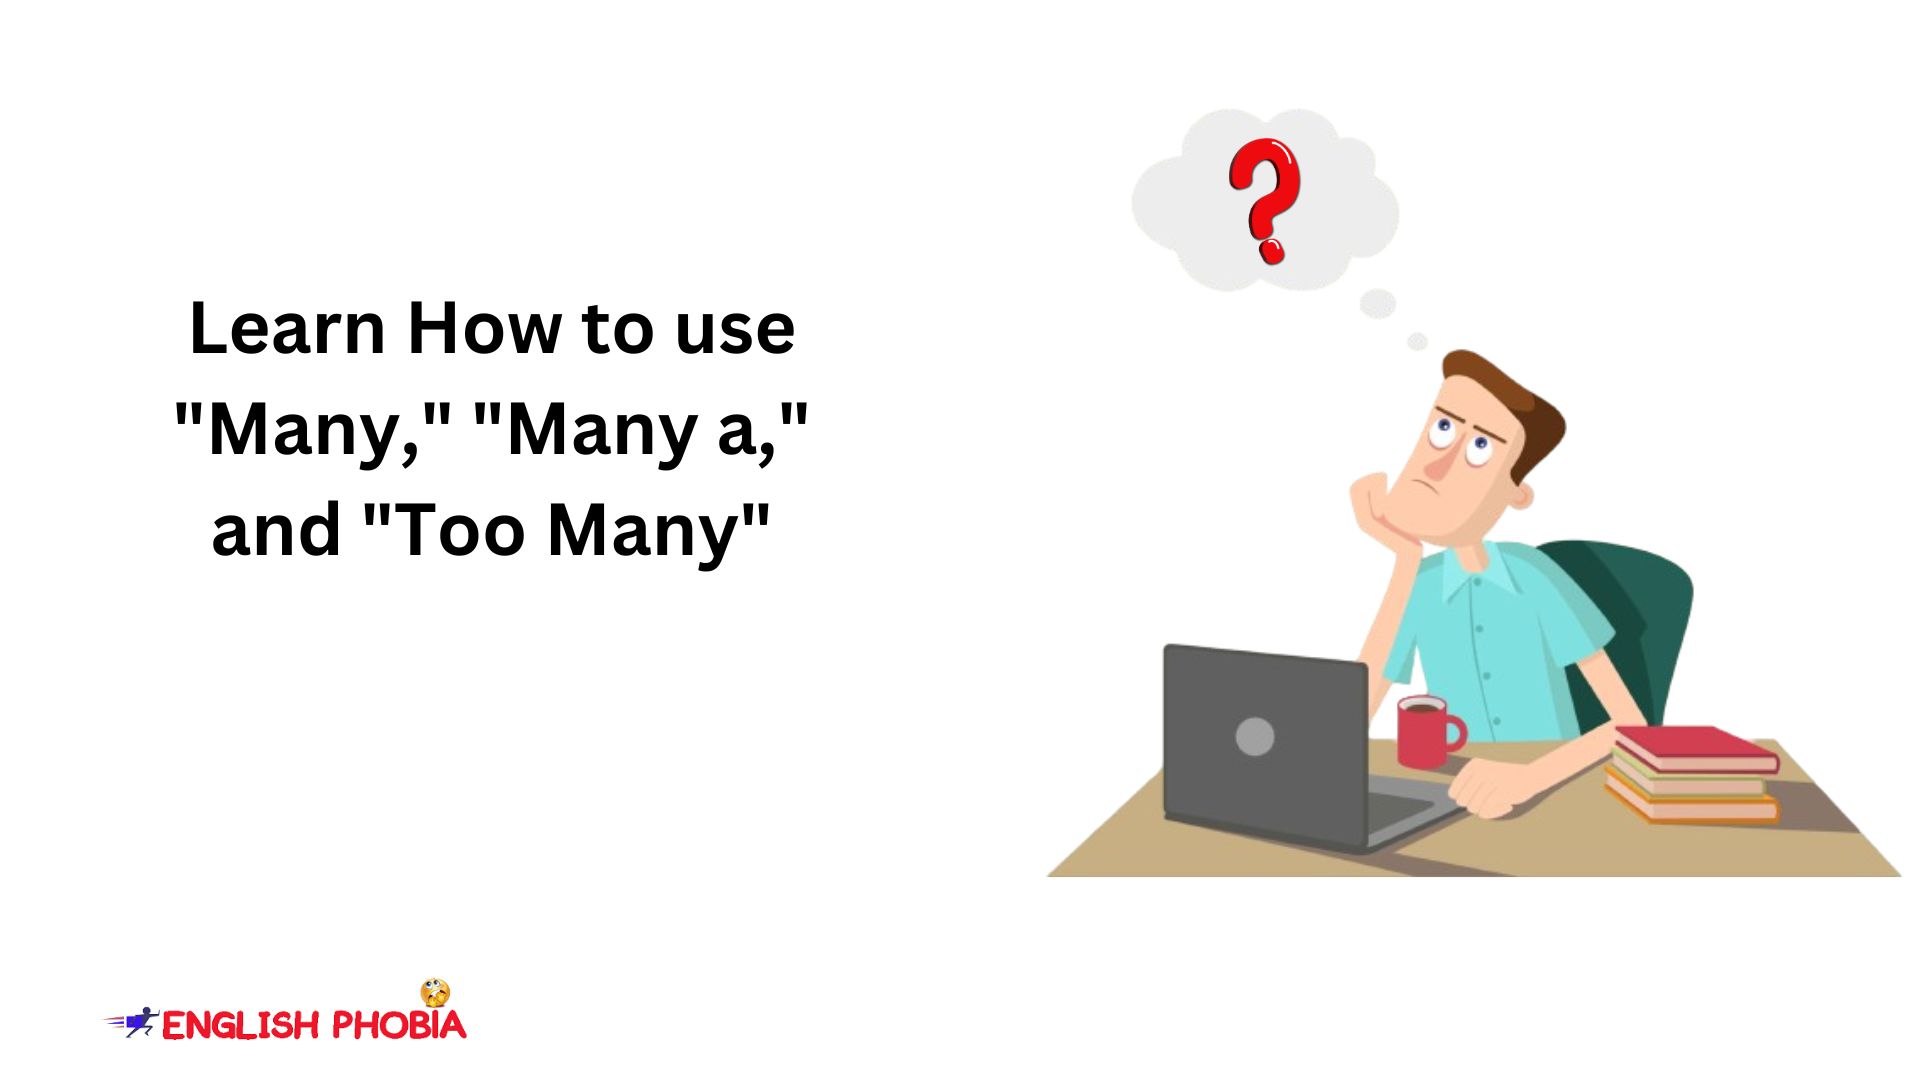 Learn How to use "Many," "Many a," and "Too Many"